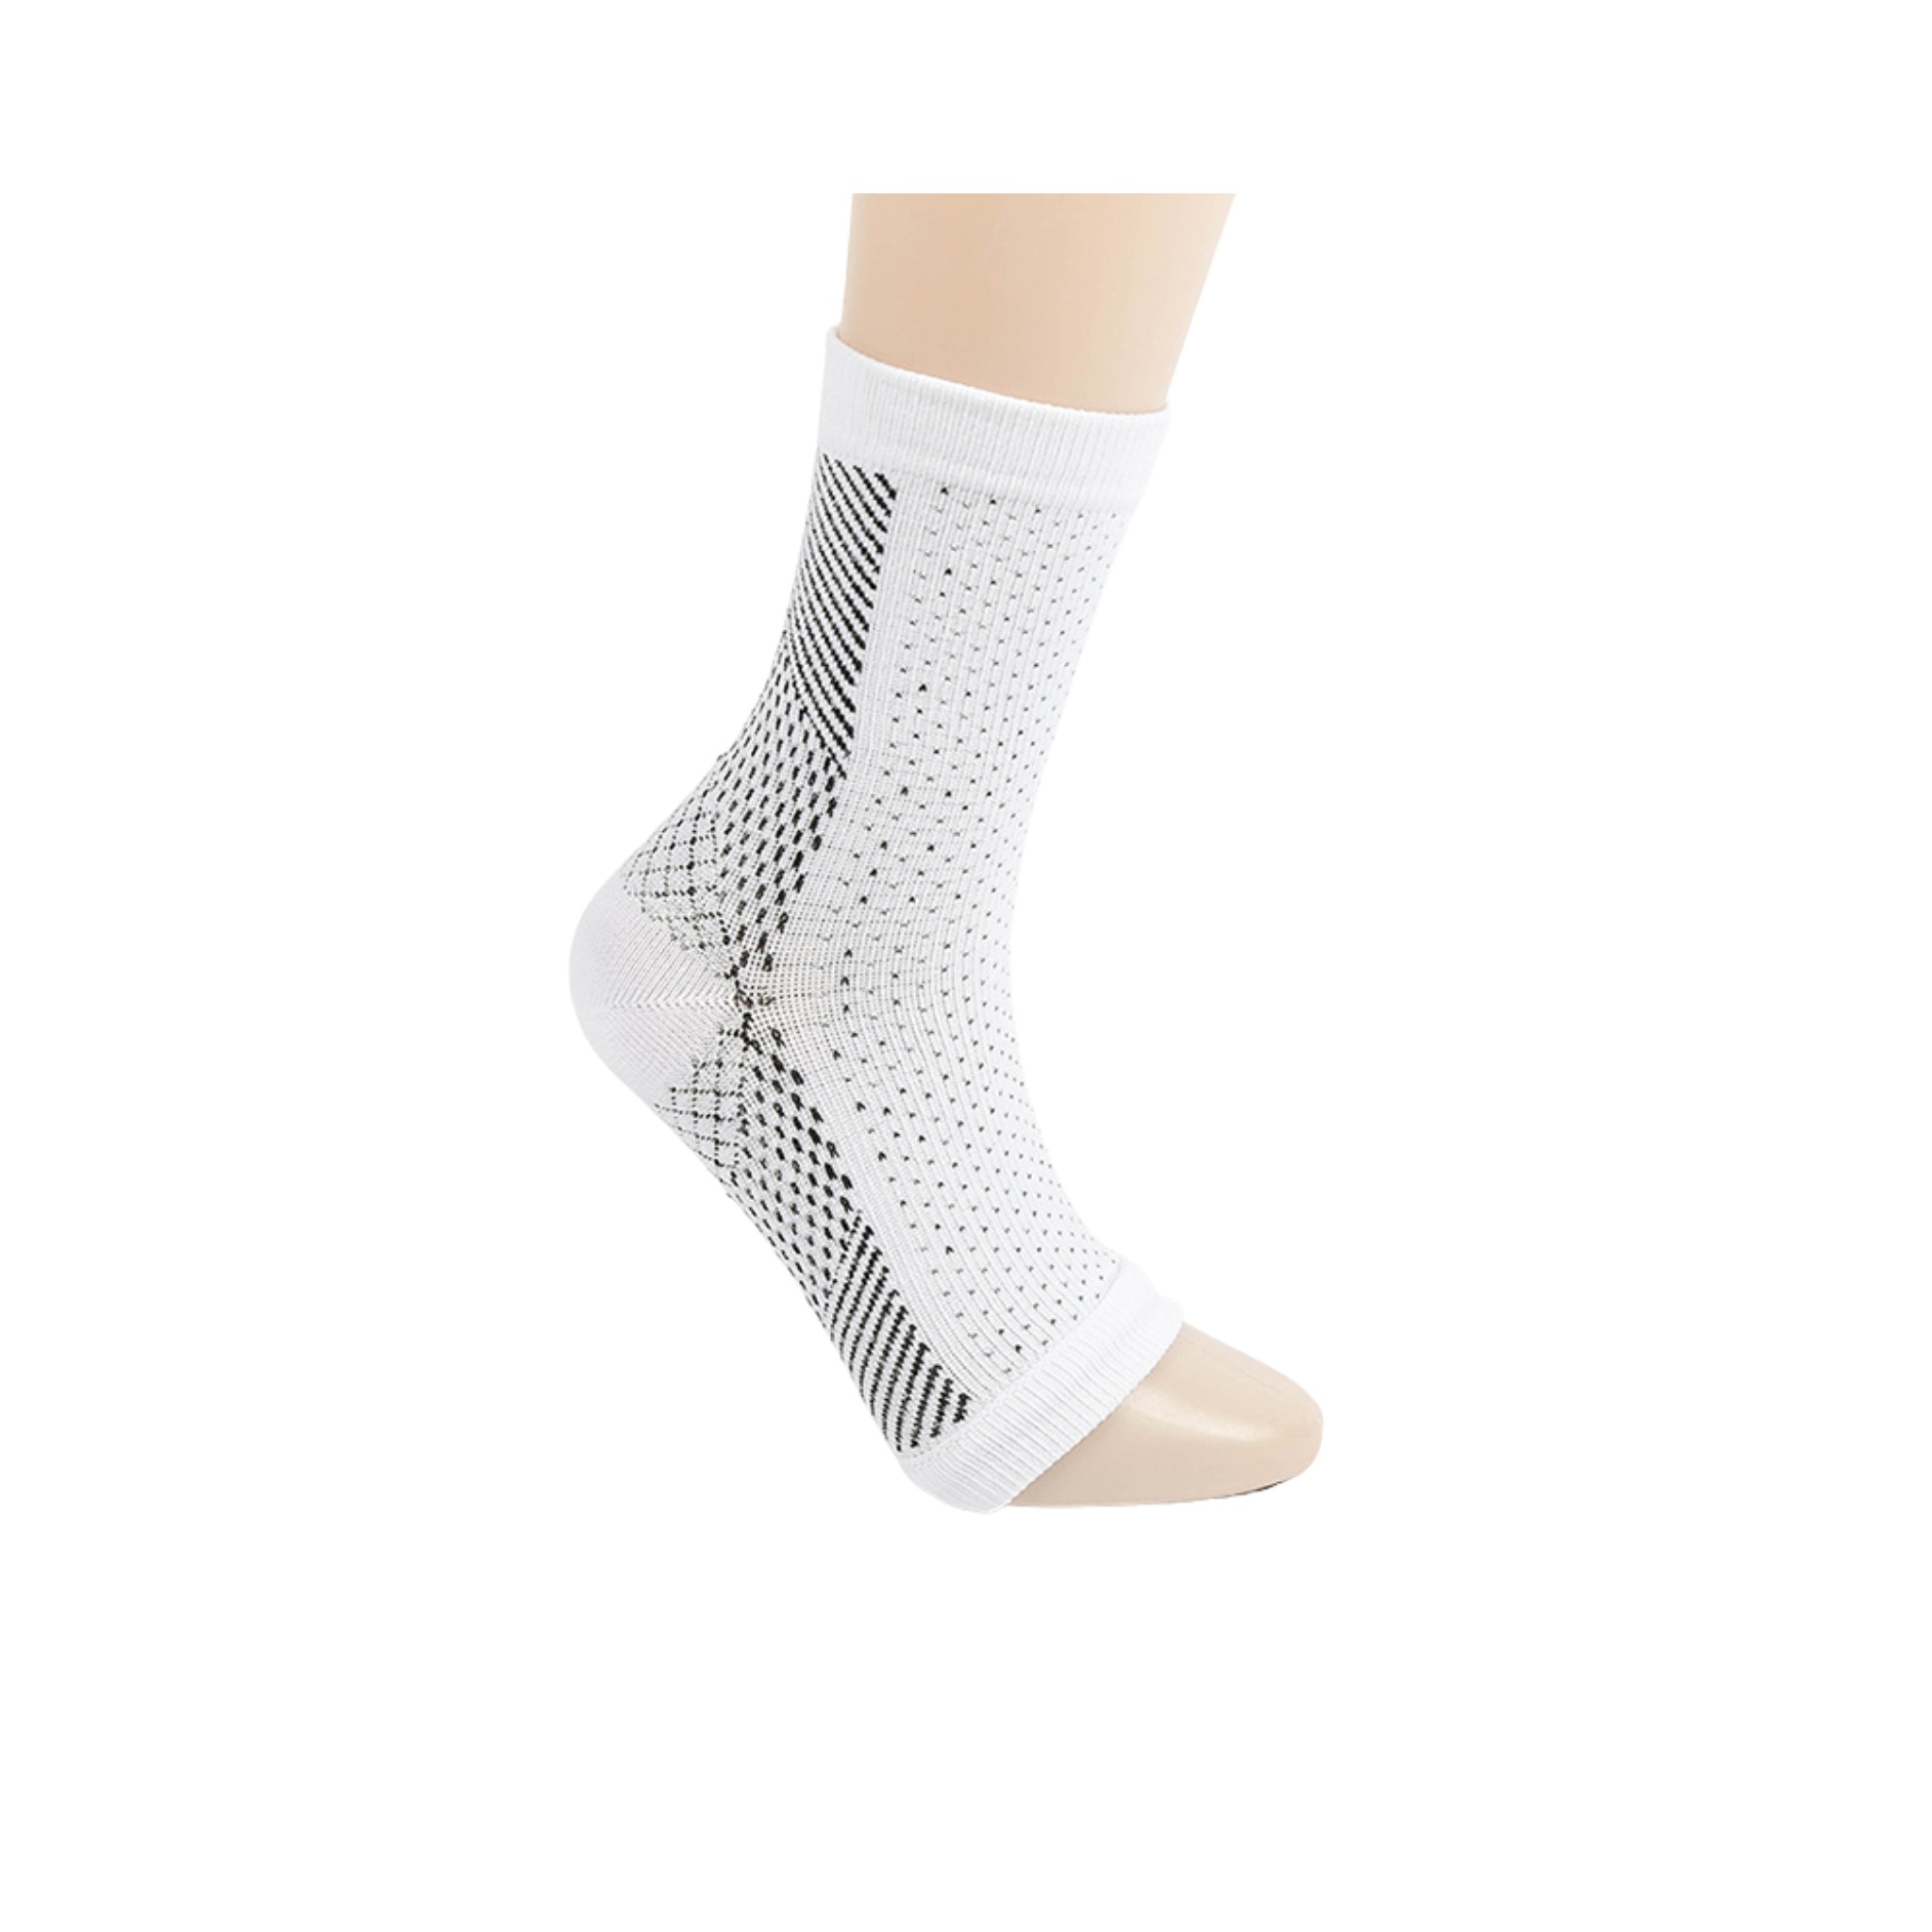 Foot Ankle, Highly Comfortable Anti Fatigue Compression, for Unisex